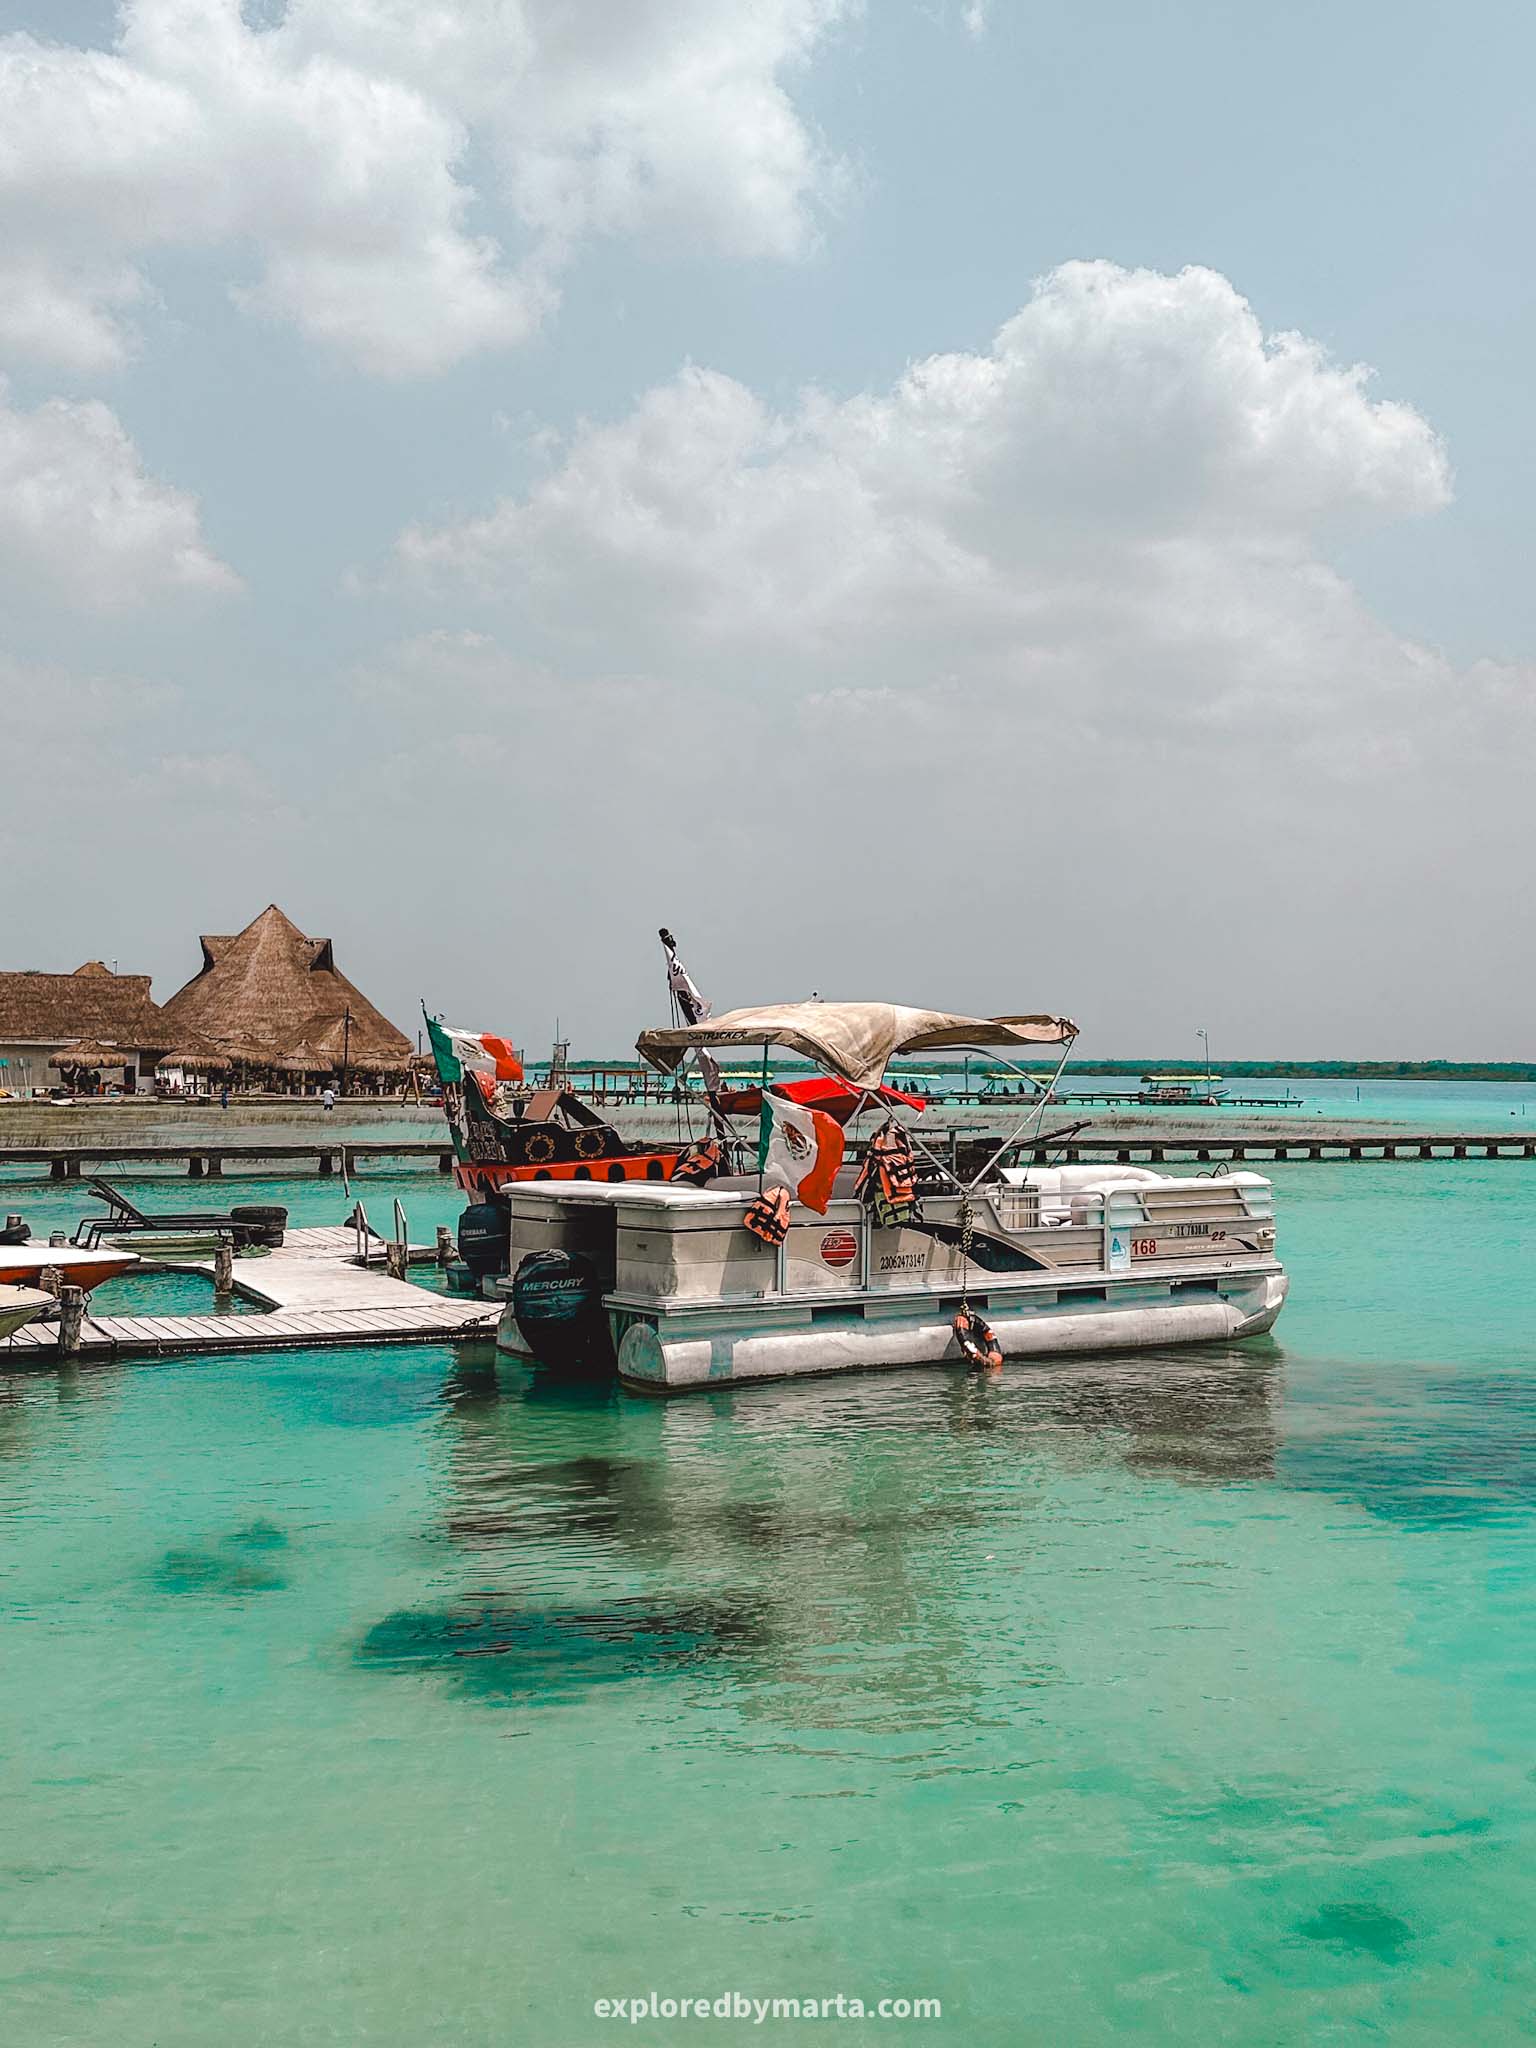 Bacalar, Mexico-a boat trip to the Channel of the Pirates is one of the most popular things to do in Bacalar, Mexico